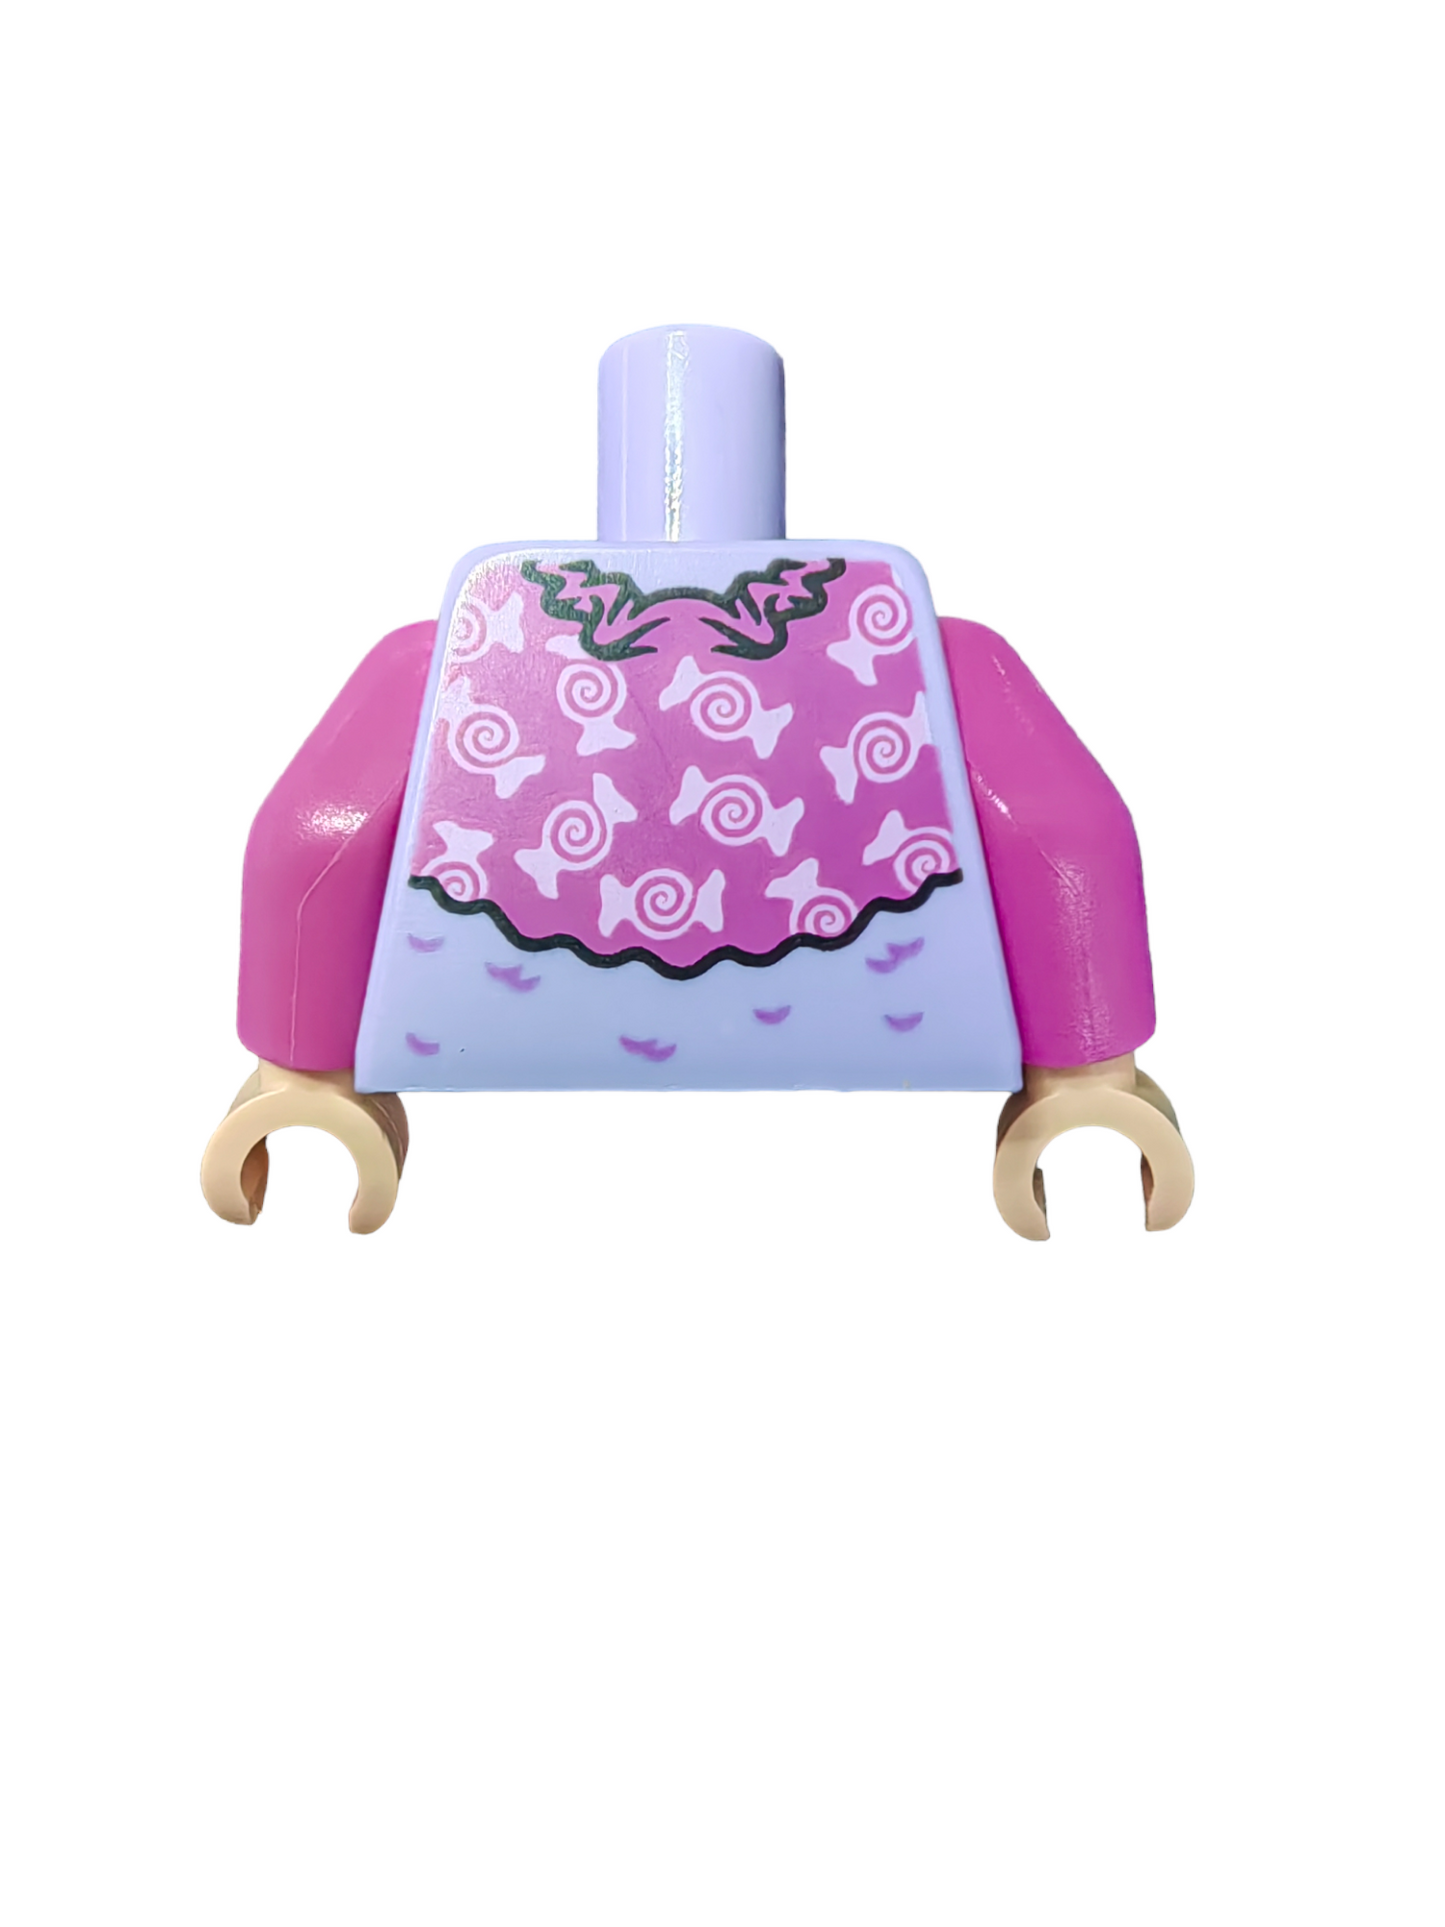 LEGO Torso, Pink Jacket with Candies on a Lavender Sweater - UB1141